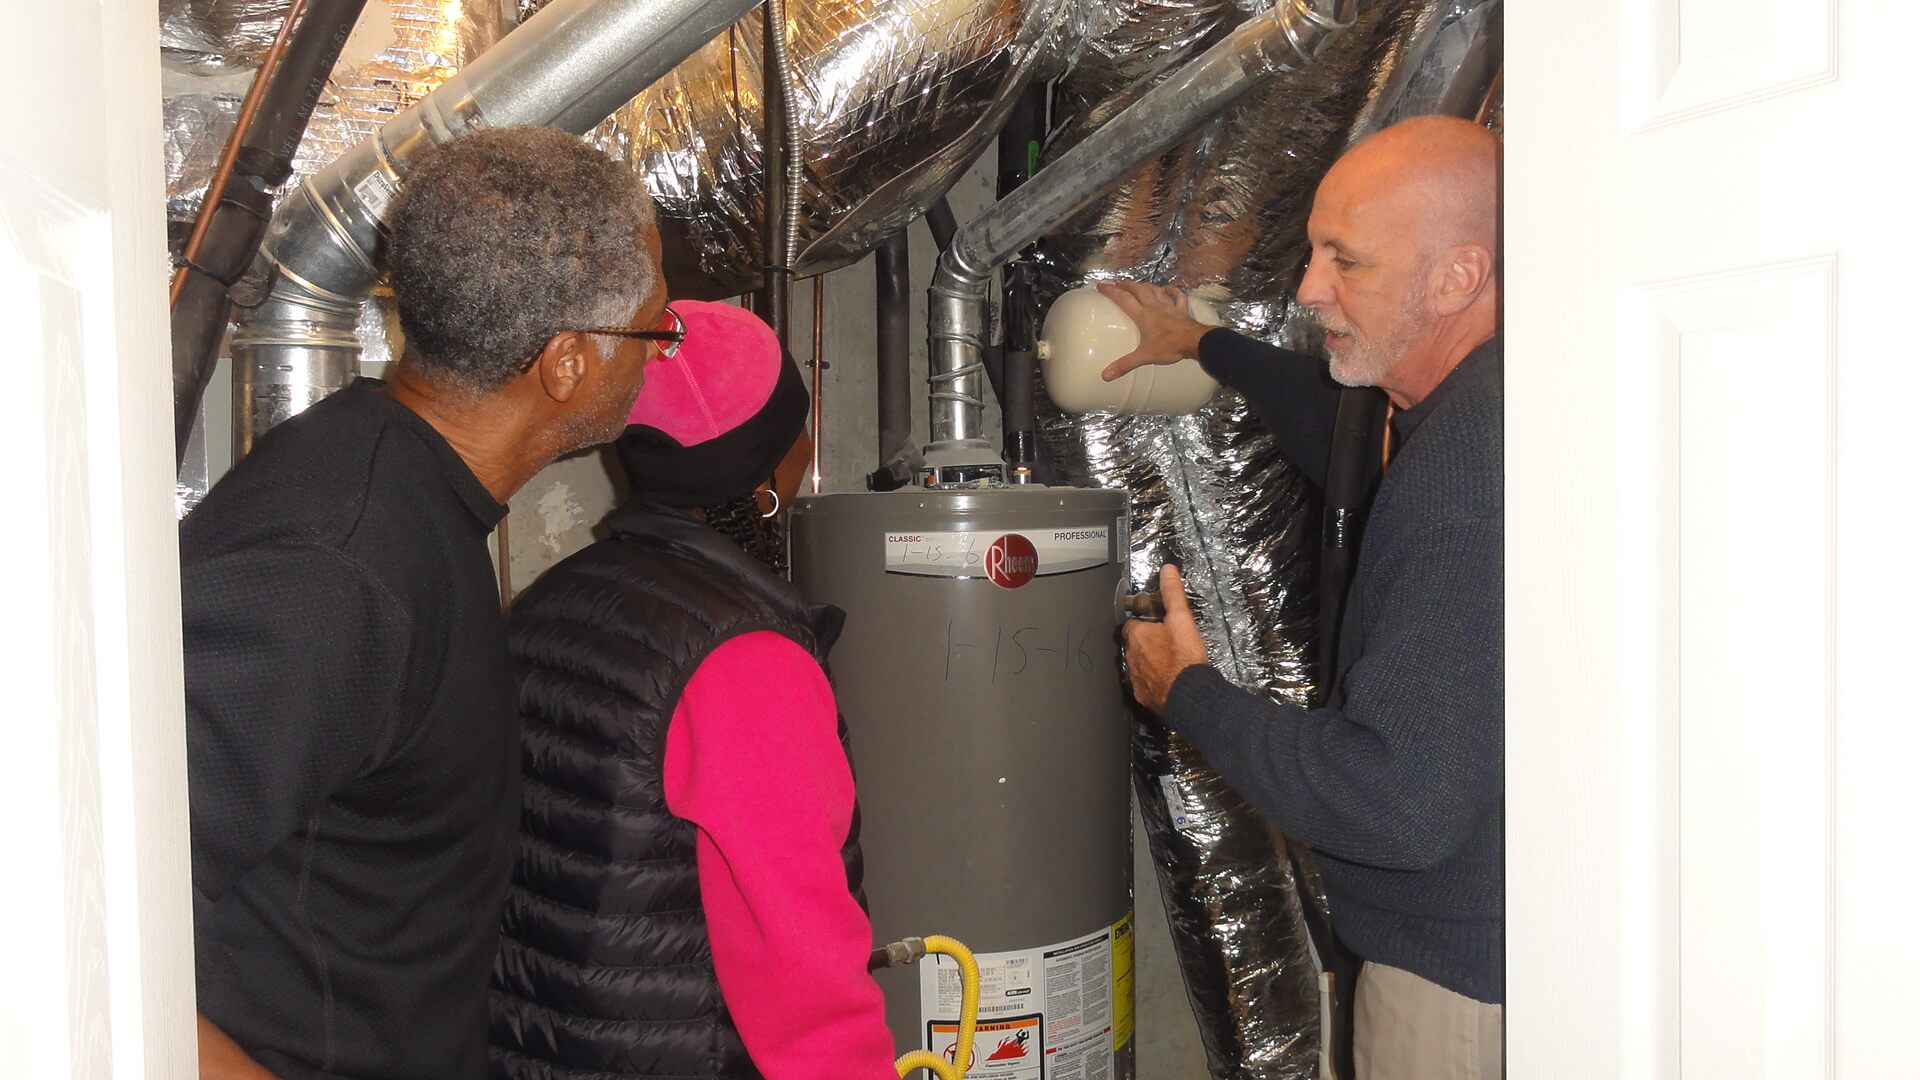 A group of people looking at a water heater.